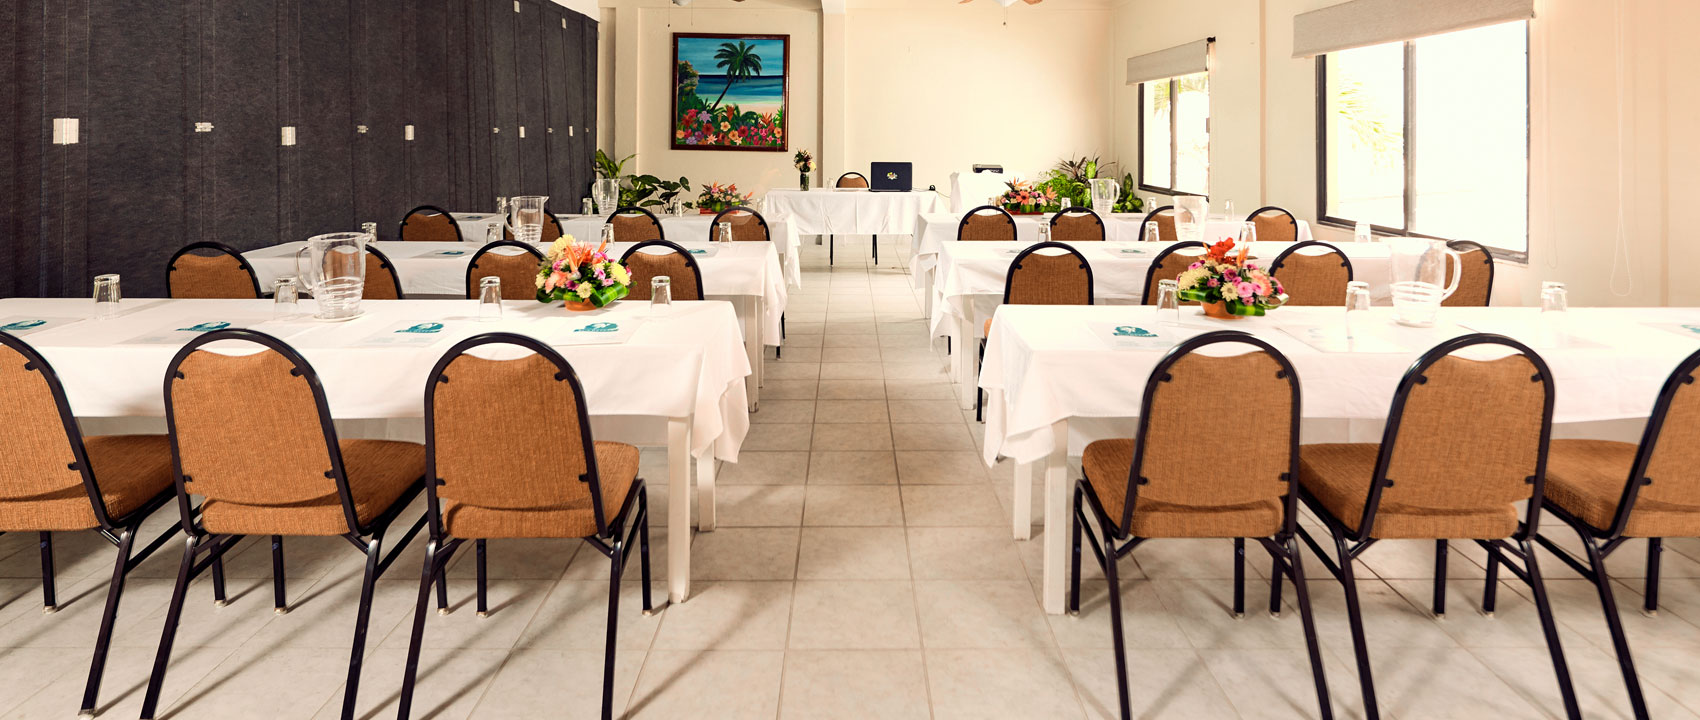 belize conference facilities